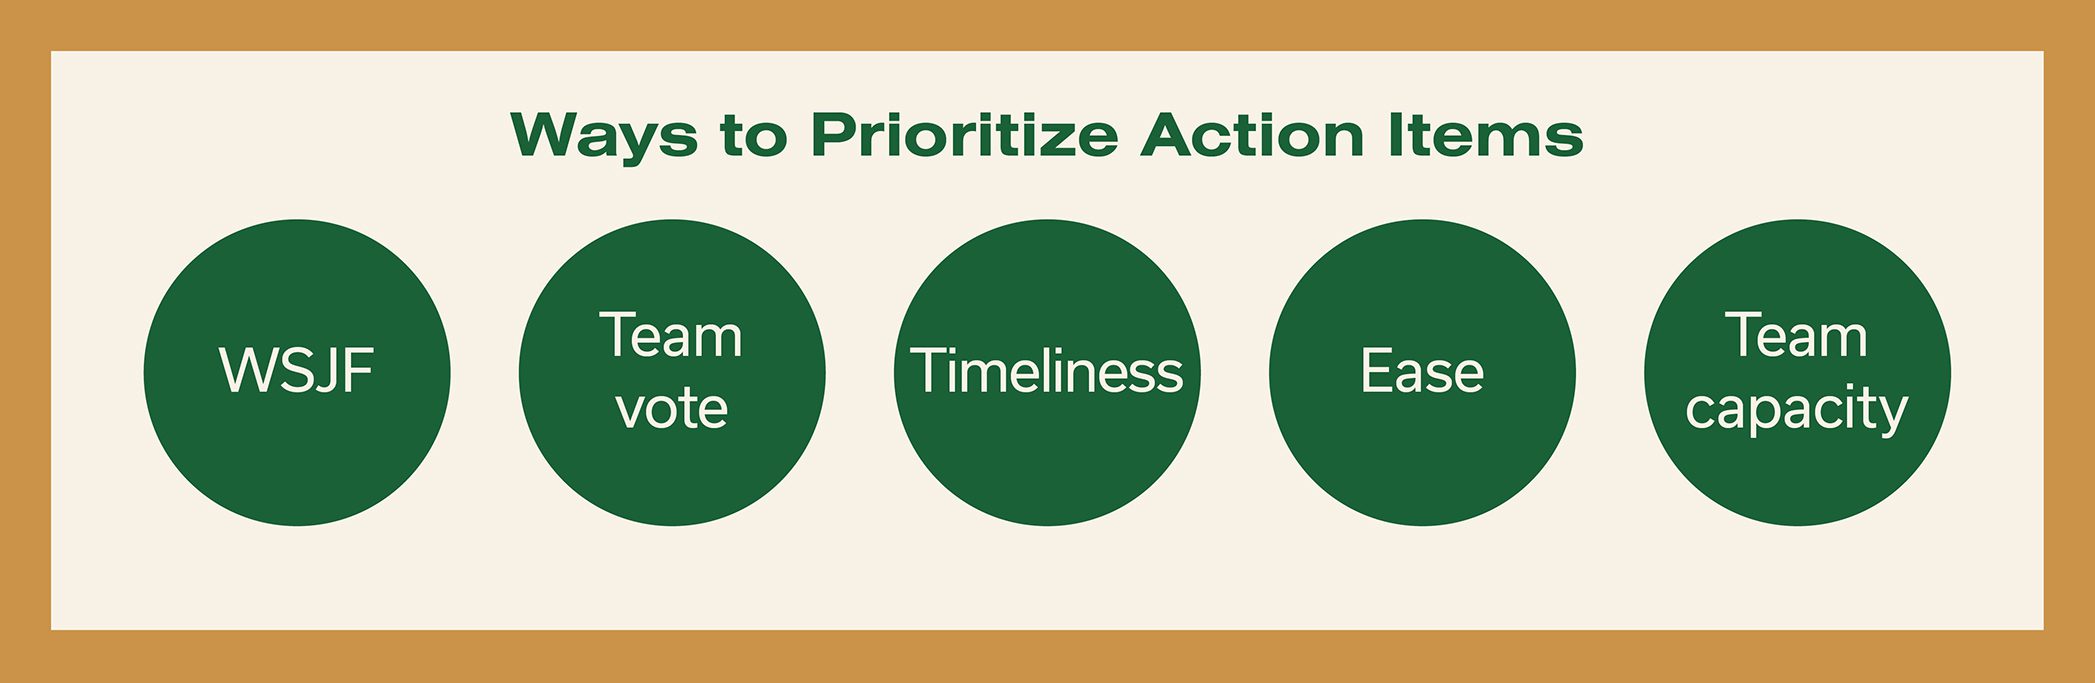 Ways to prioritize action items: WSJF, Team vote, Timeliness, Ease, Team capacity